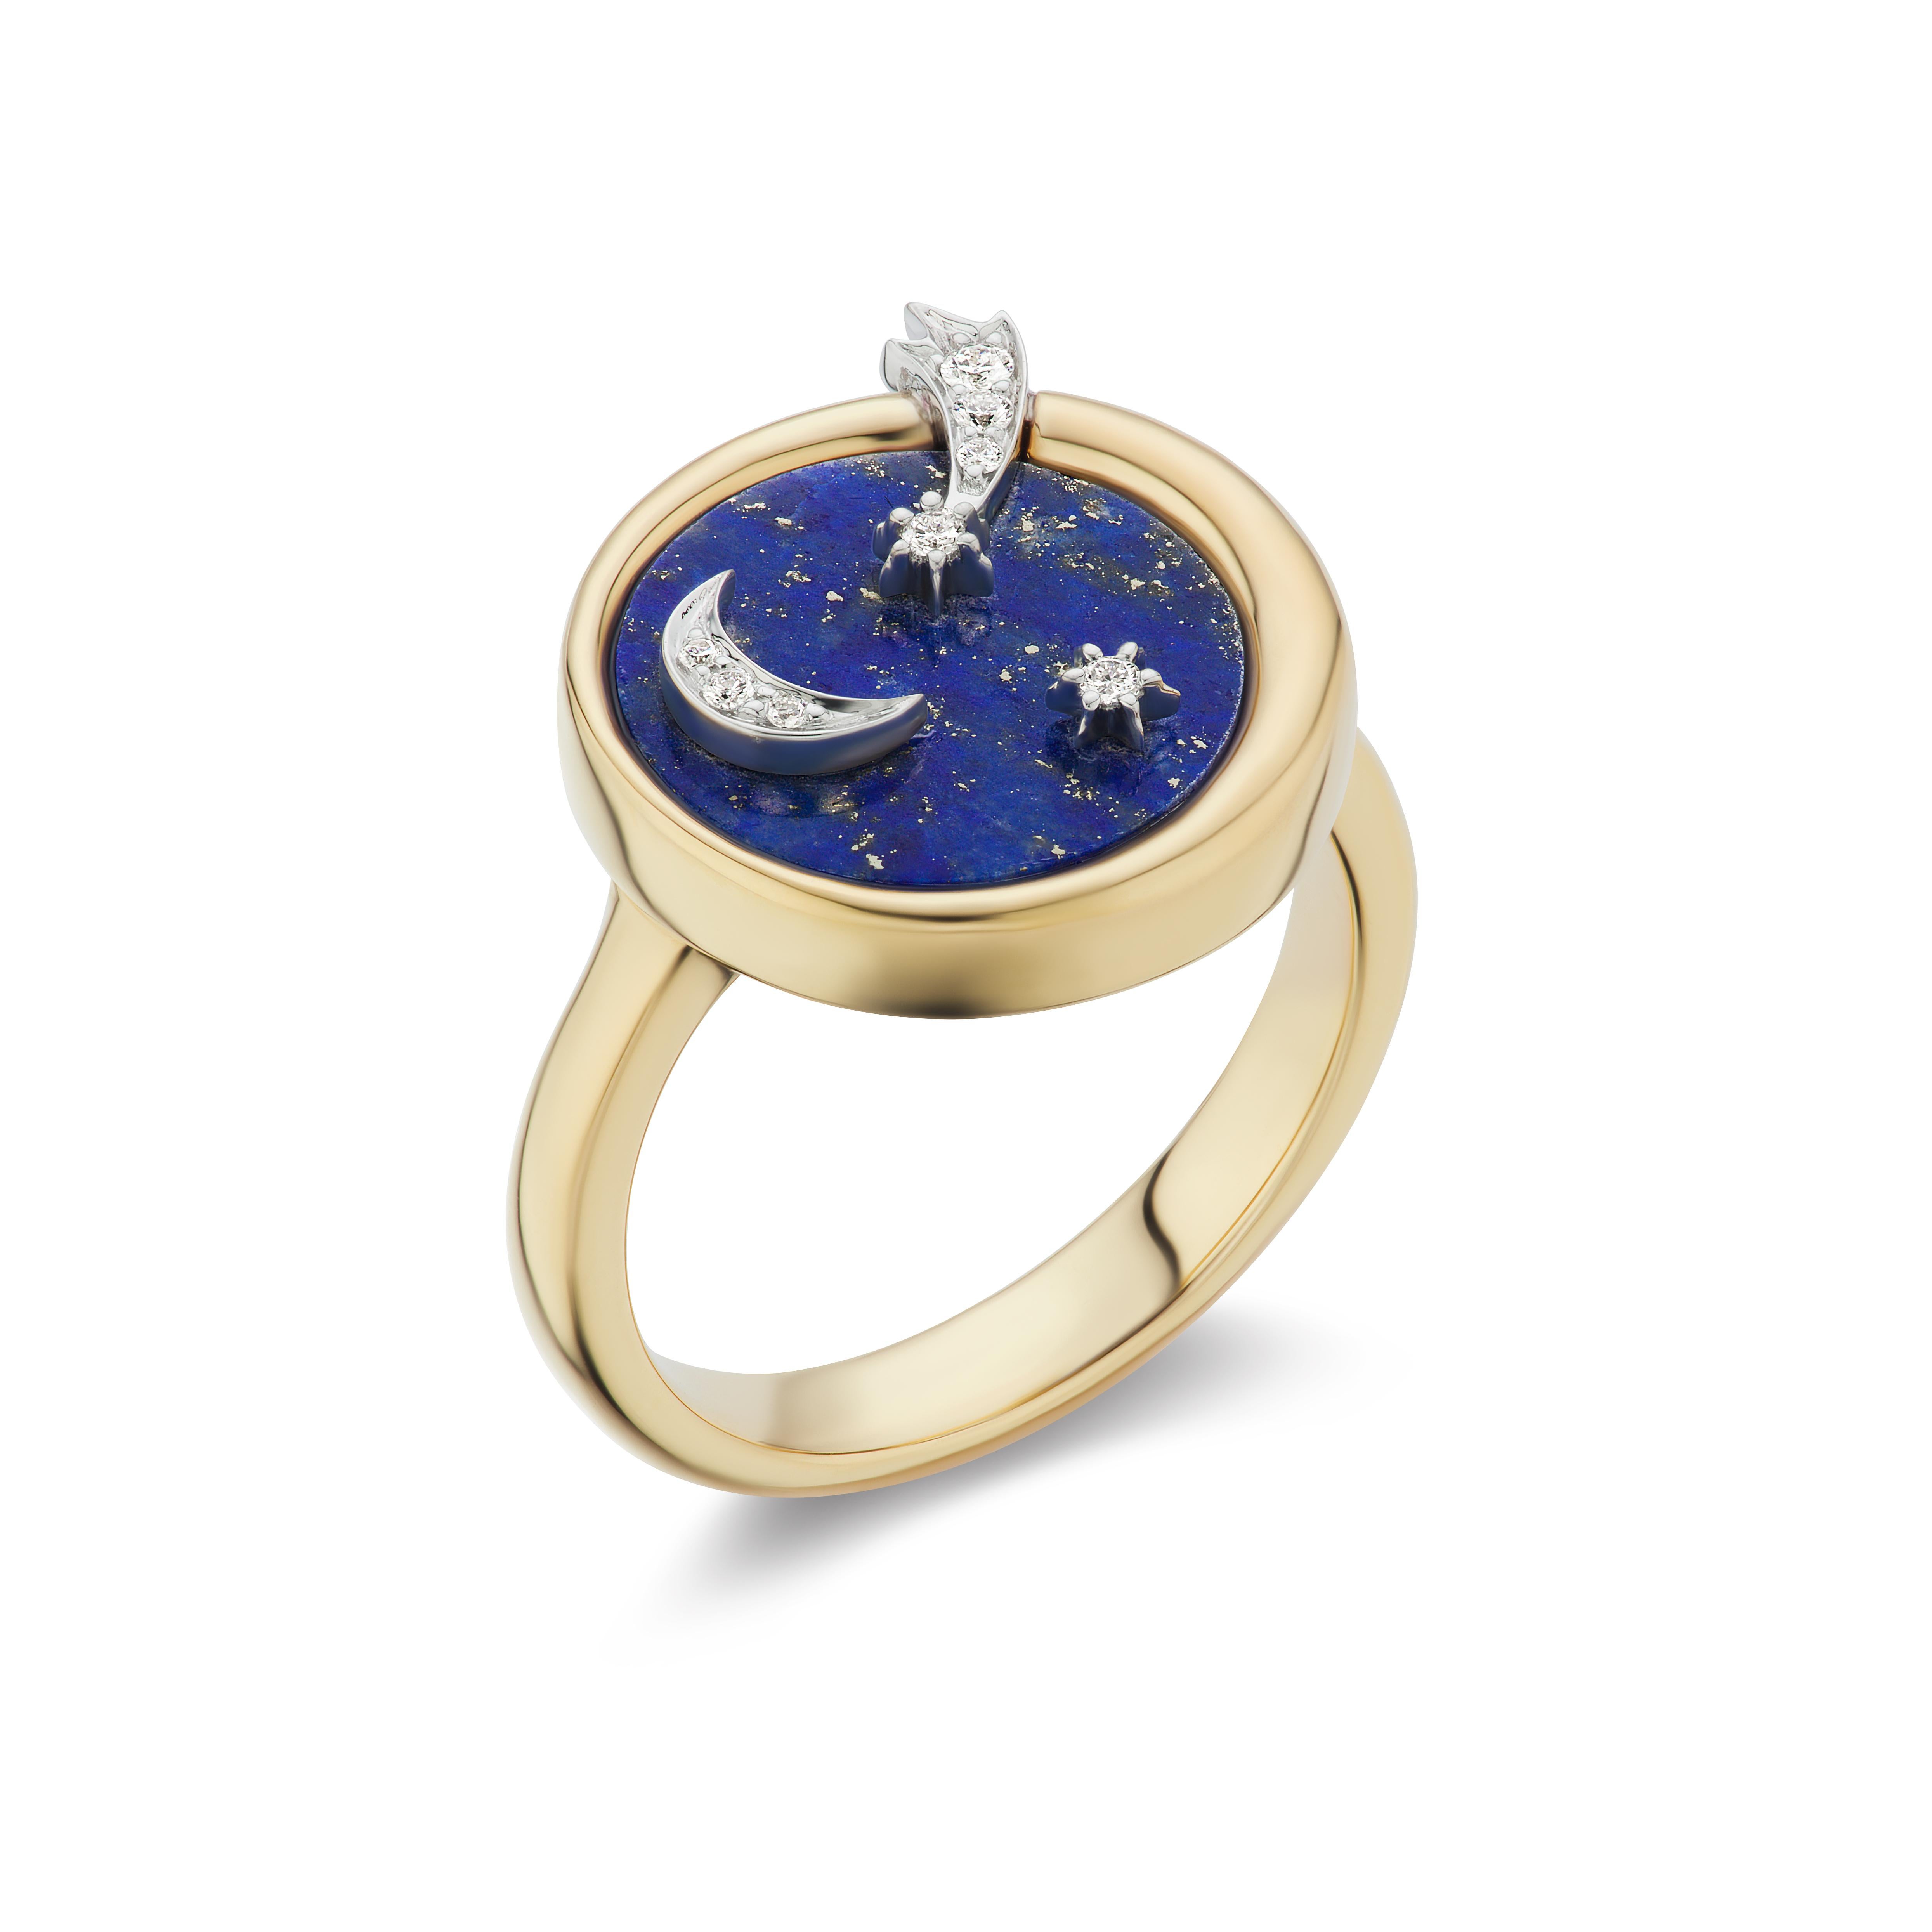 The Four Elements Air Ring is a dazzling piece honoring both the visual and spiritual cosmos. A blue lapis lazuli ether is the background on which a luminous crescent moon and stars sparkle in yellow gold and pave diamonds. A radiant white gold and